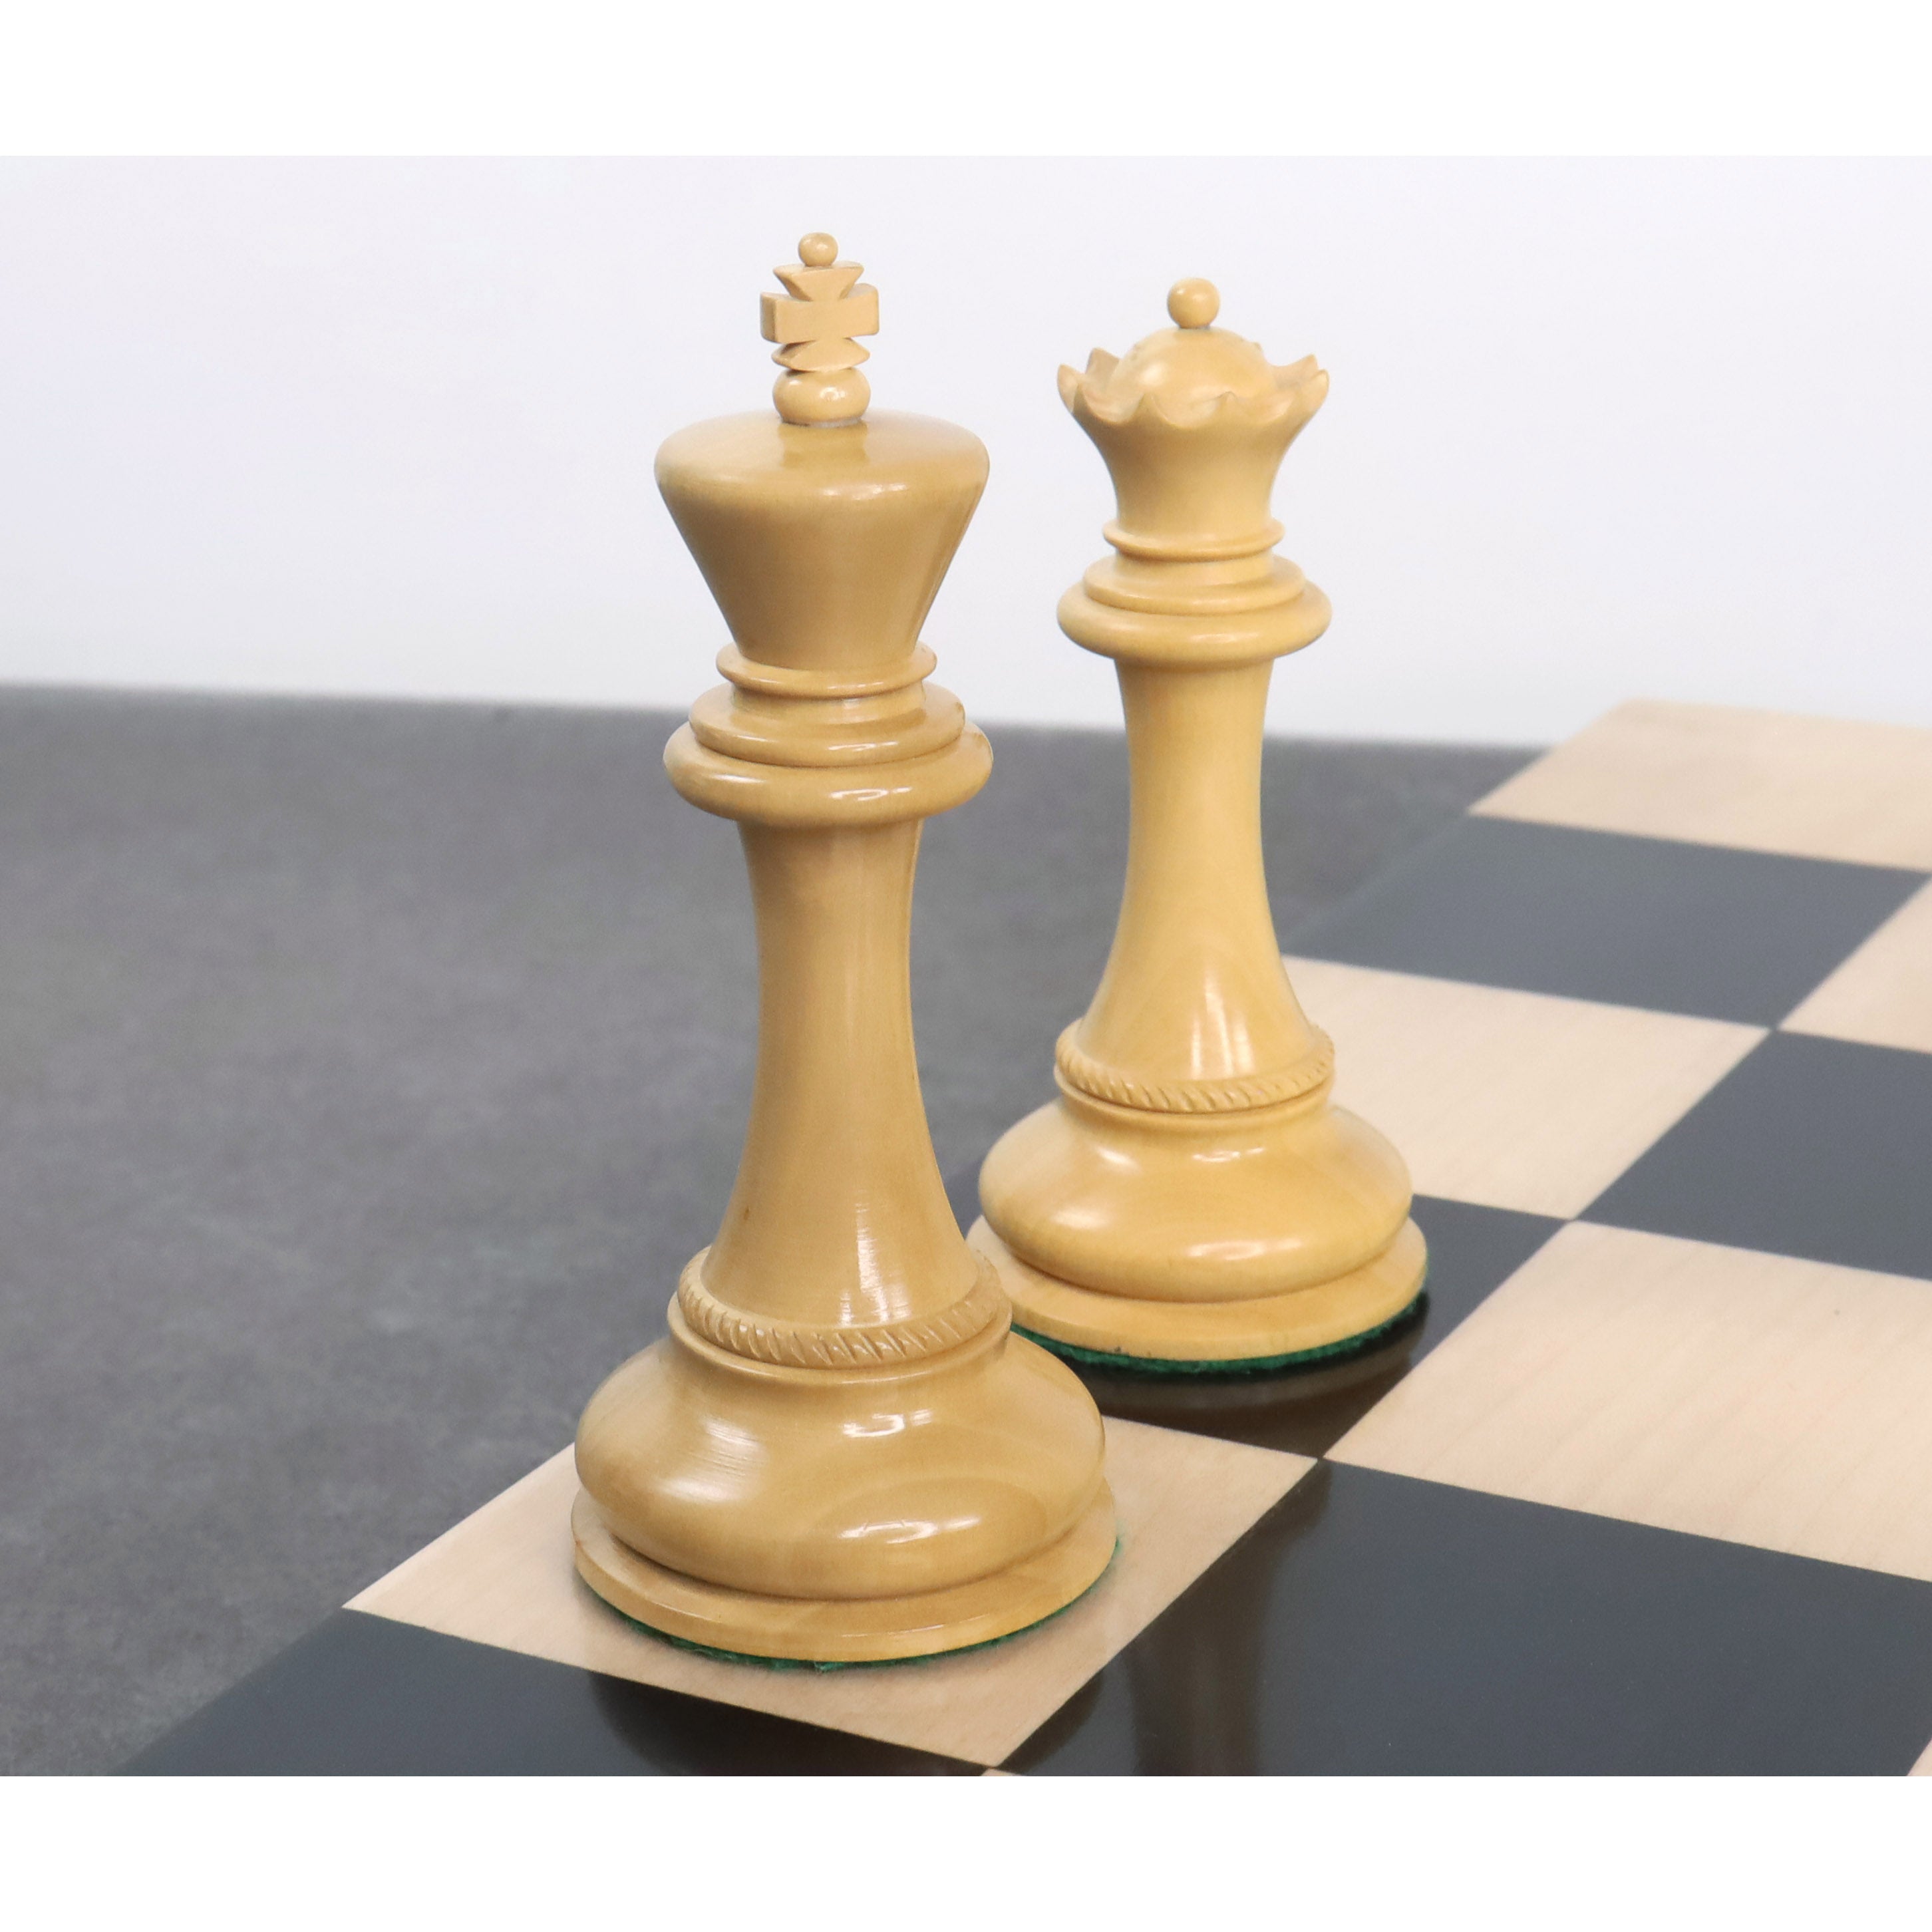 4.5" Imperator Luxury Staunton Chess Set- Chess Pieces Only - Ebony Wood - Triple Weight